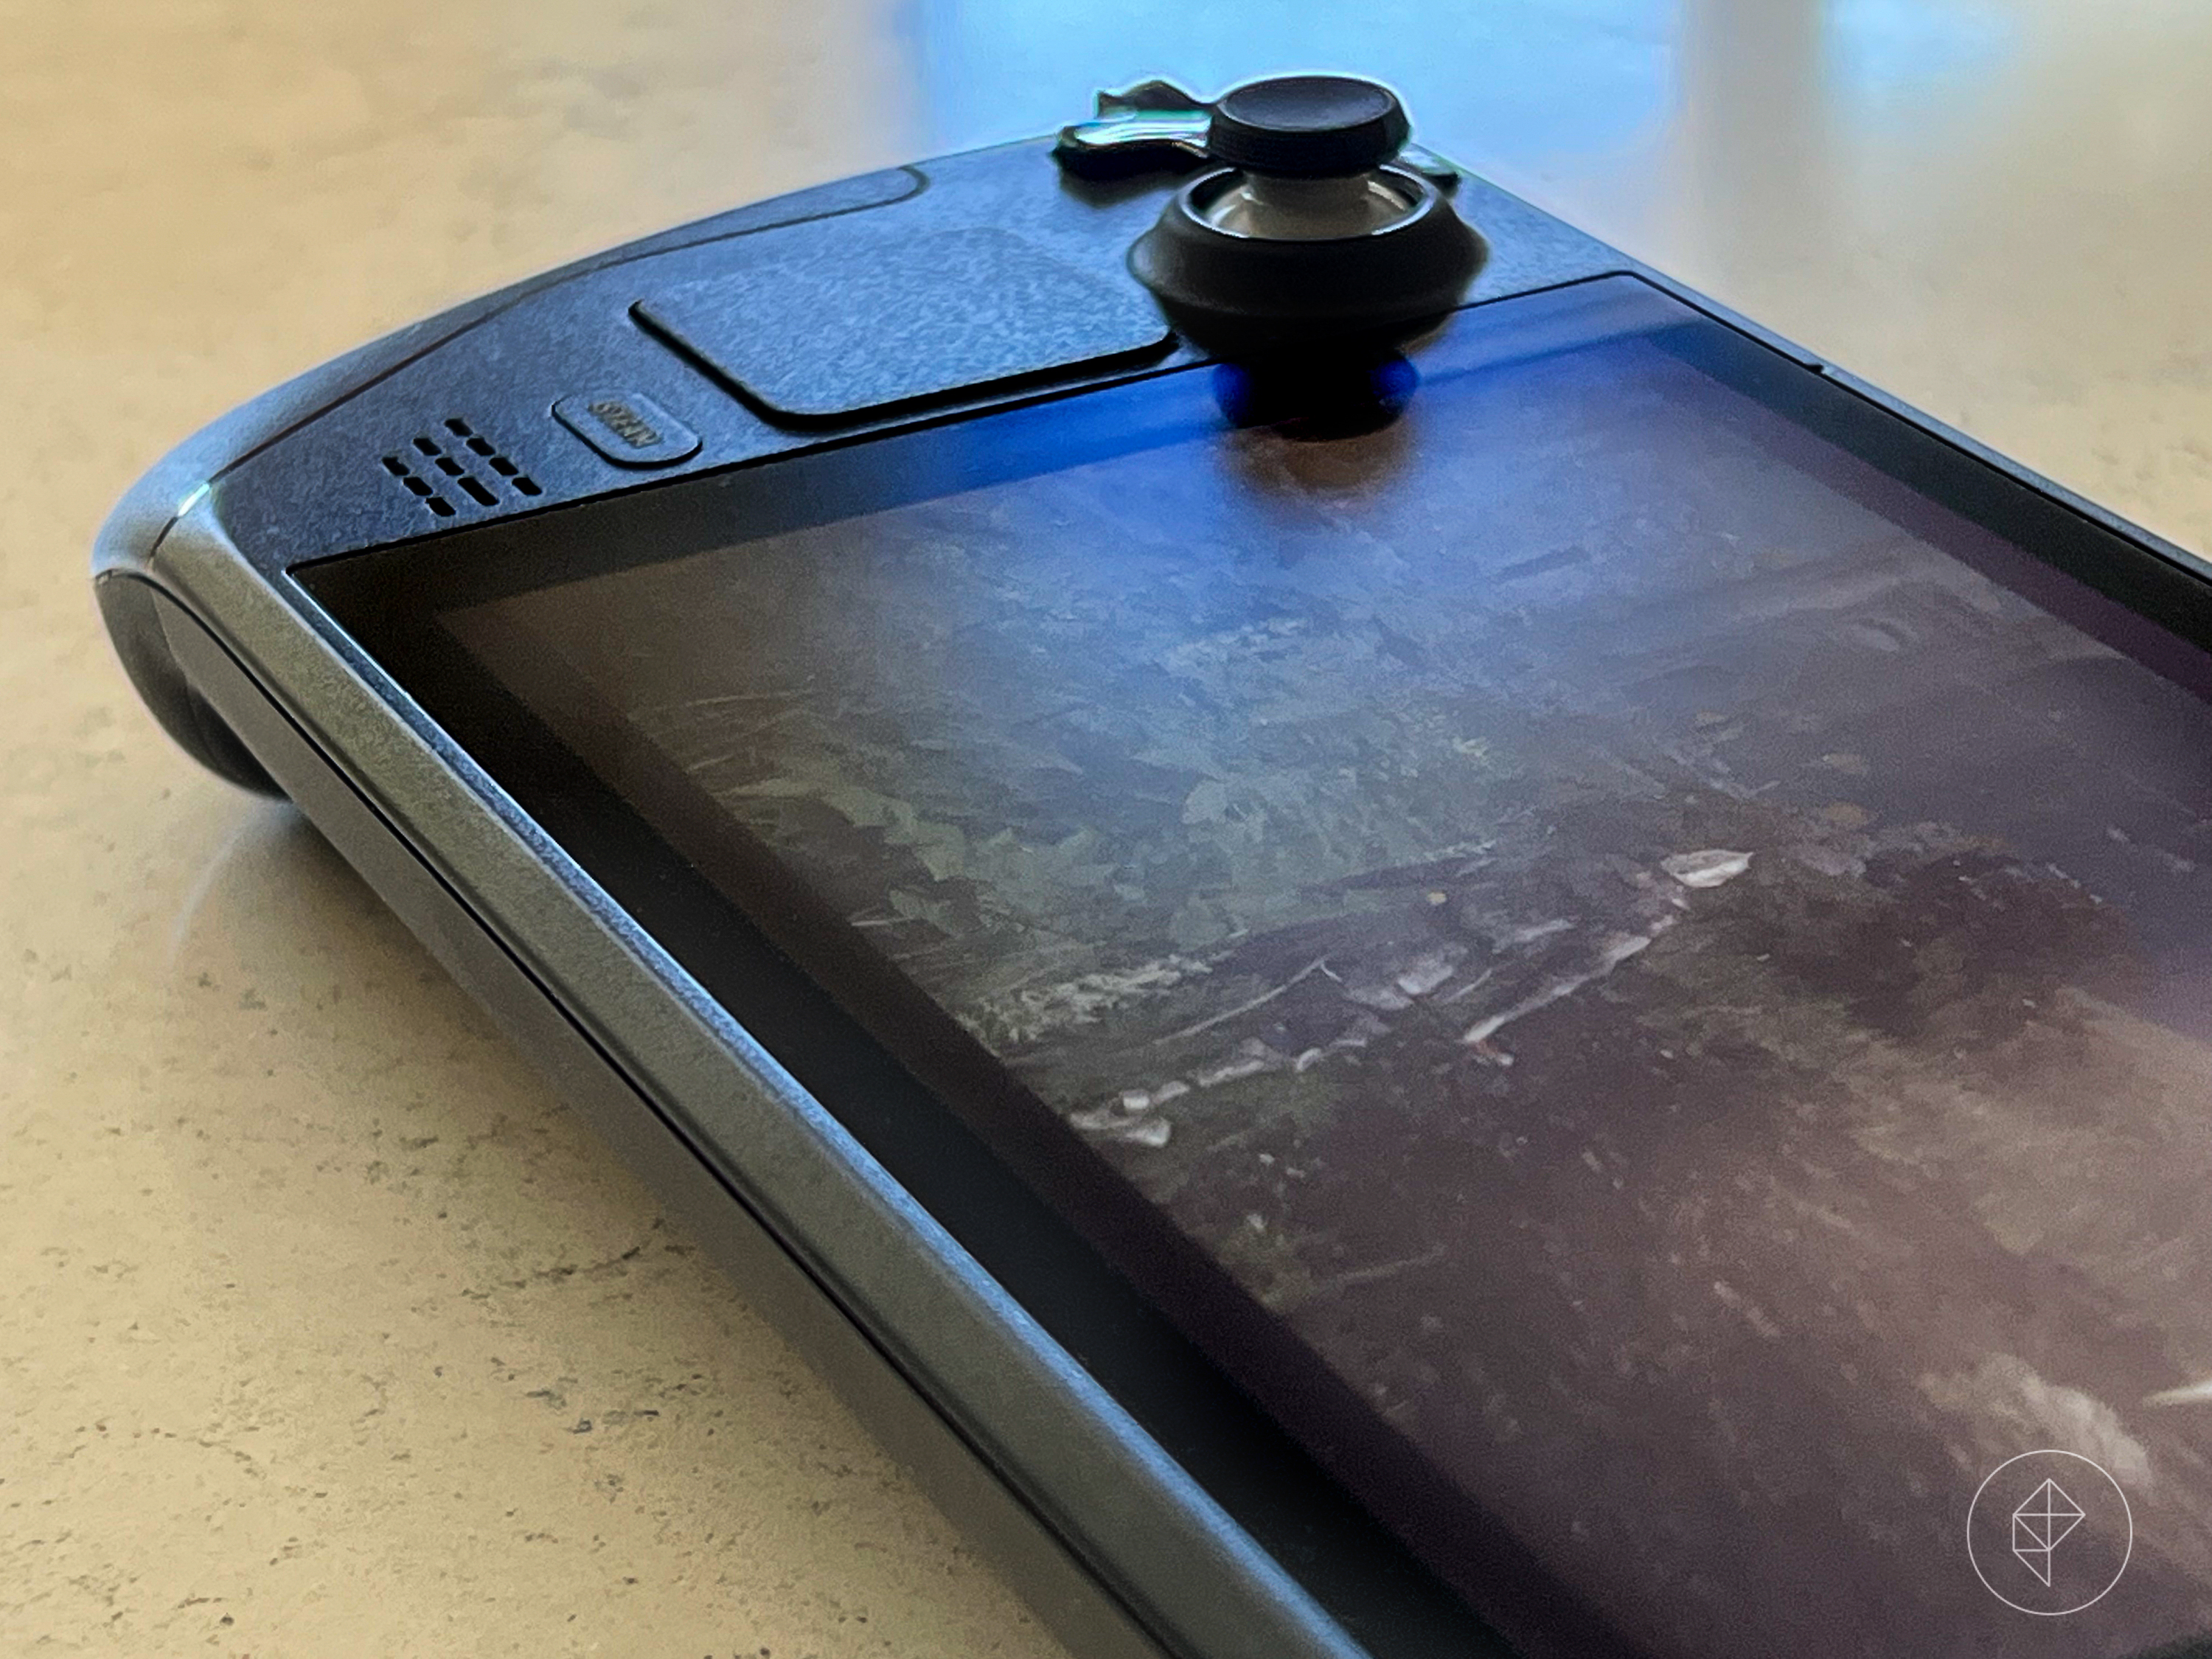 Close up photo of Steam Deck hand-held gaming device on stone surface